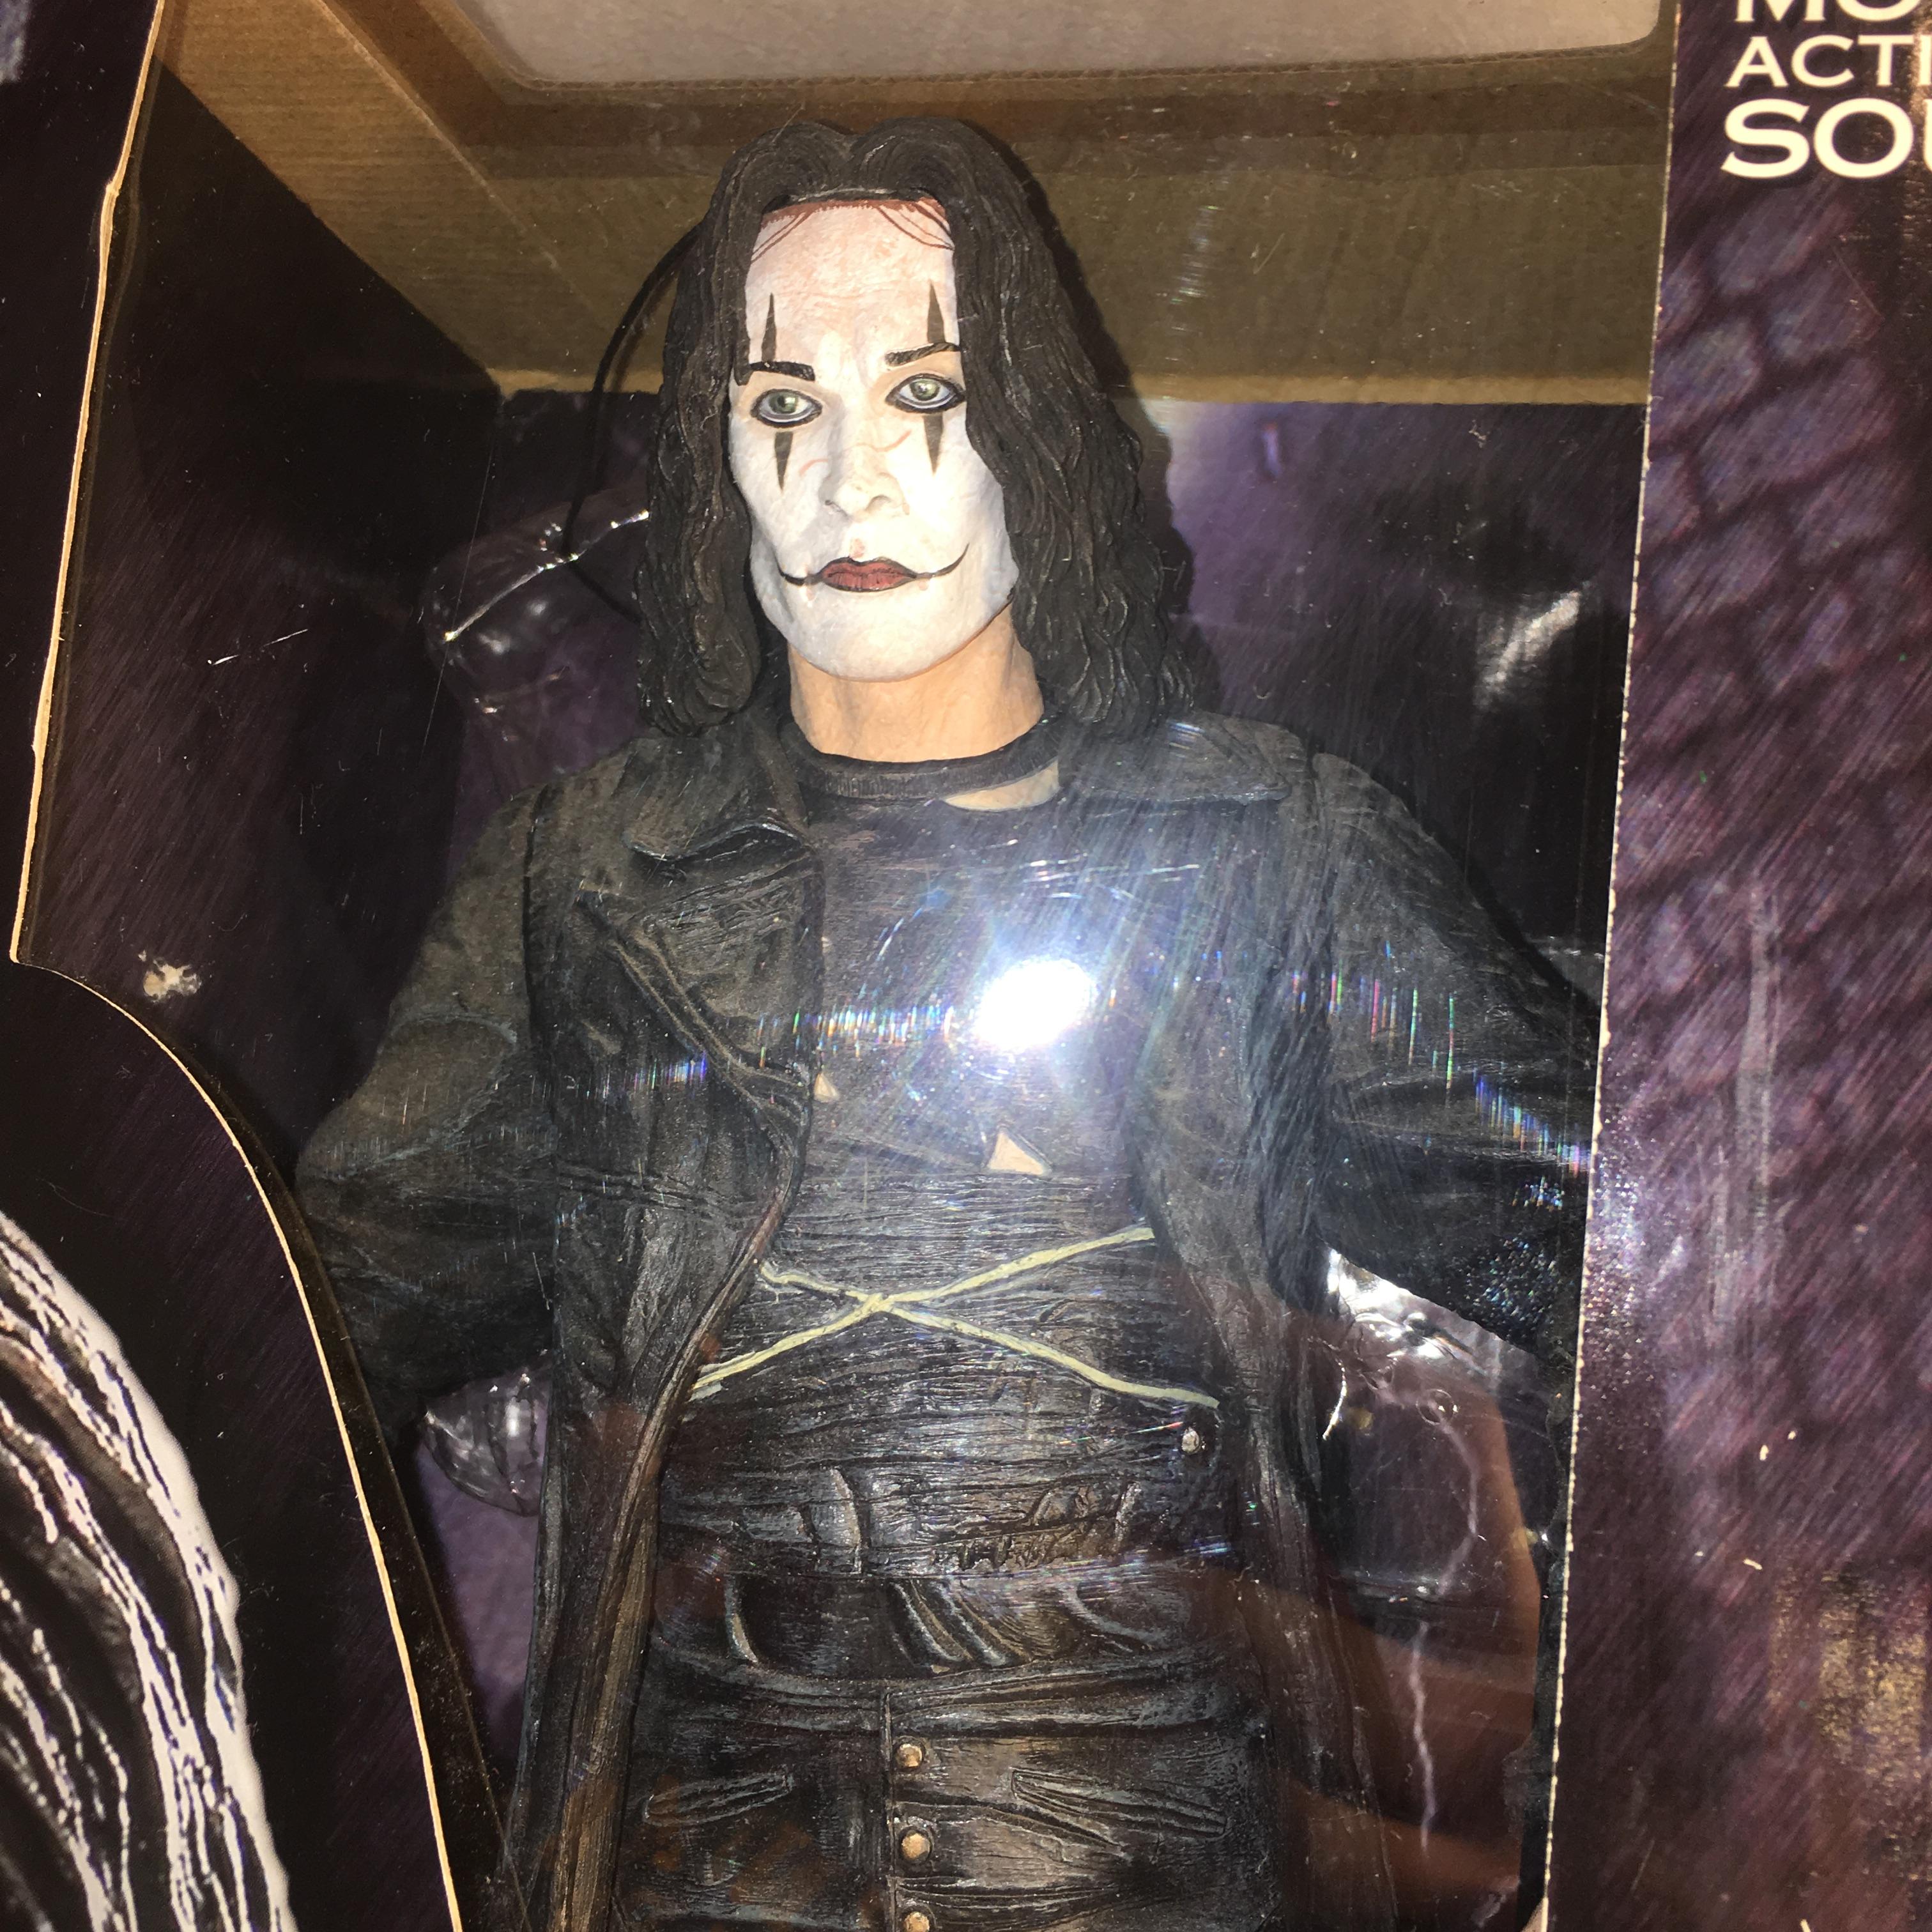 Collector Loose in Original Box 18"tall Motion Activated Sopund Eric Draven The Crow Figure